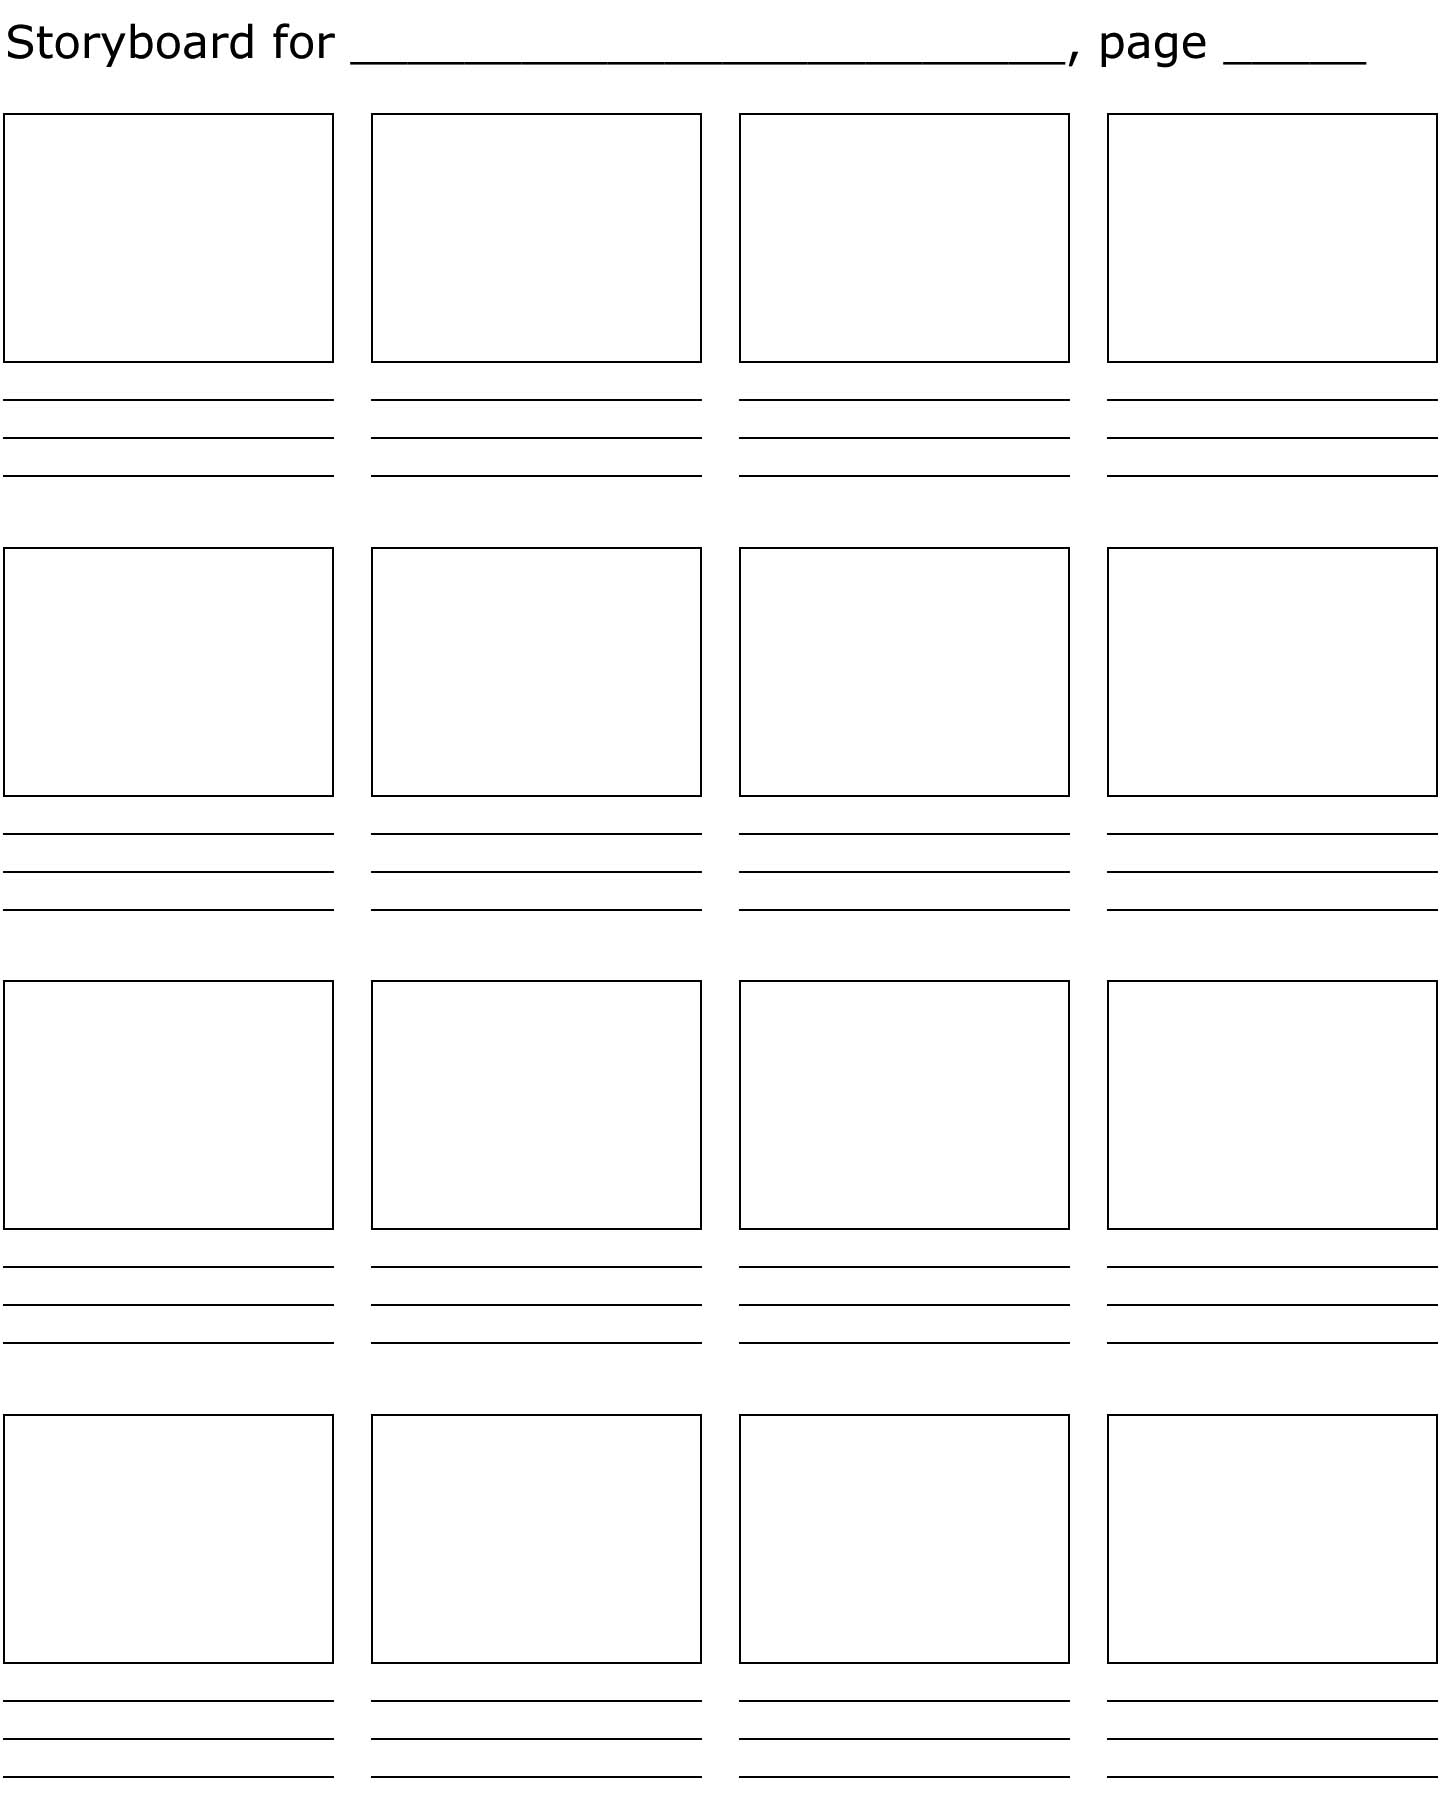 storyboard assignment template